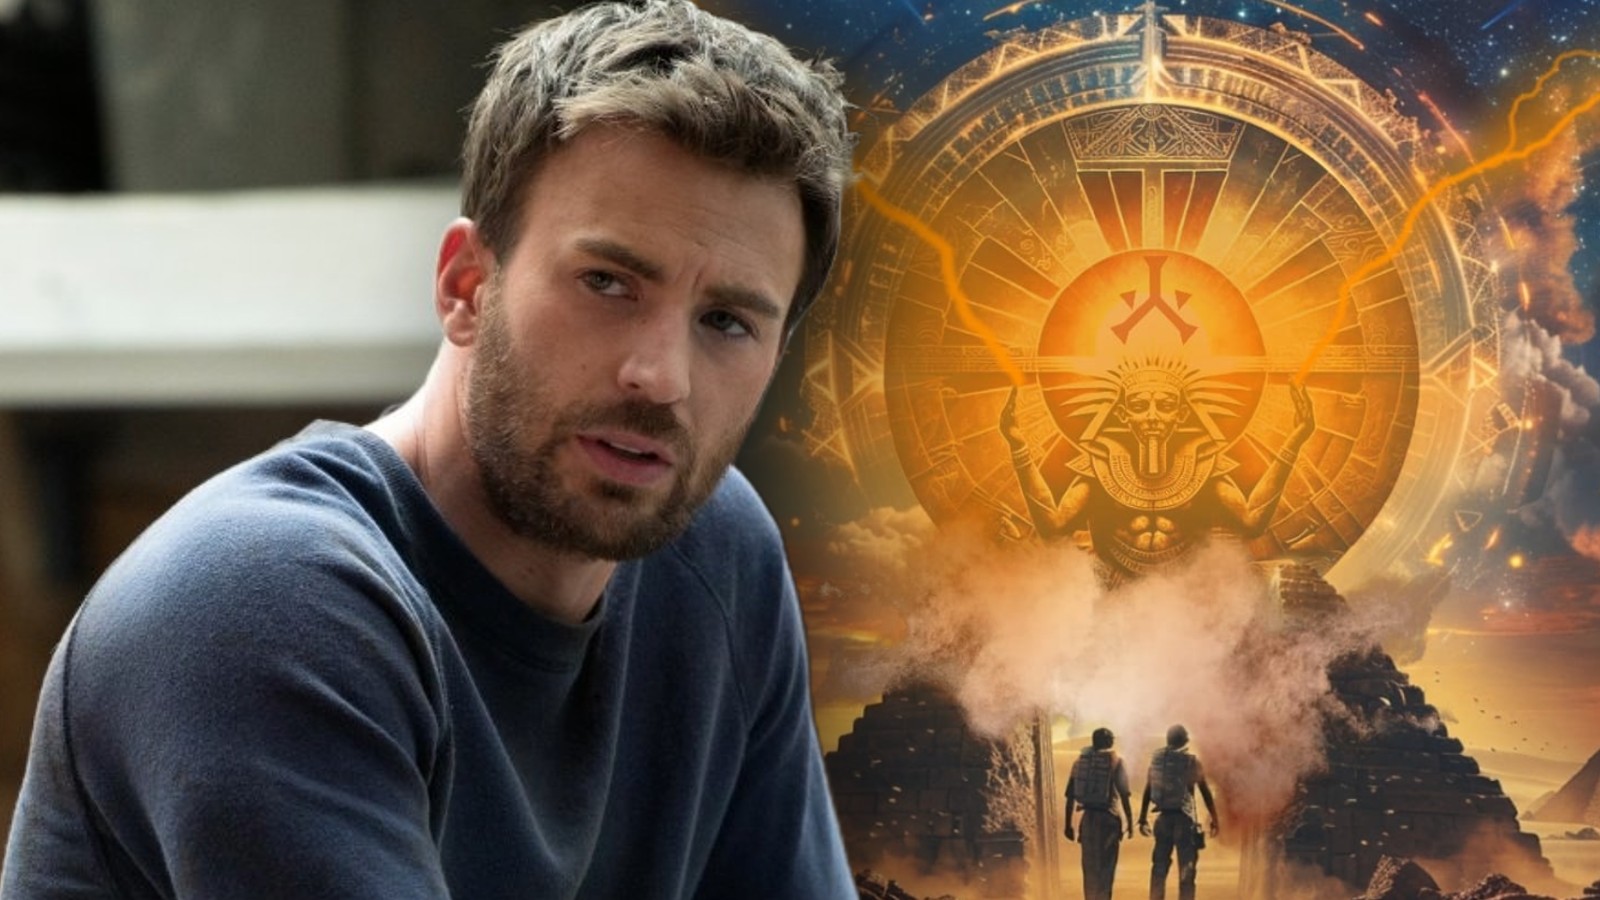 Stargate PeopleAsia - Hollywood heartthrob Chris Evans is changing